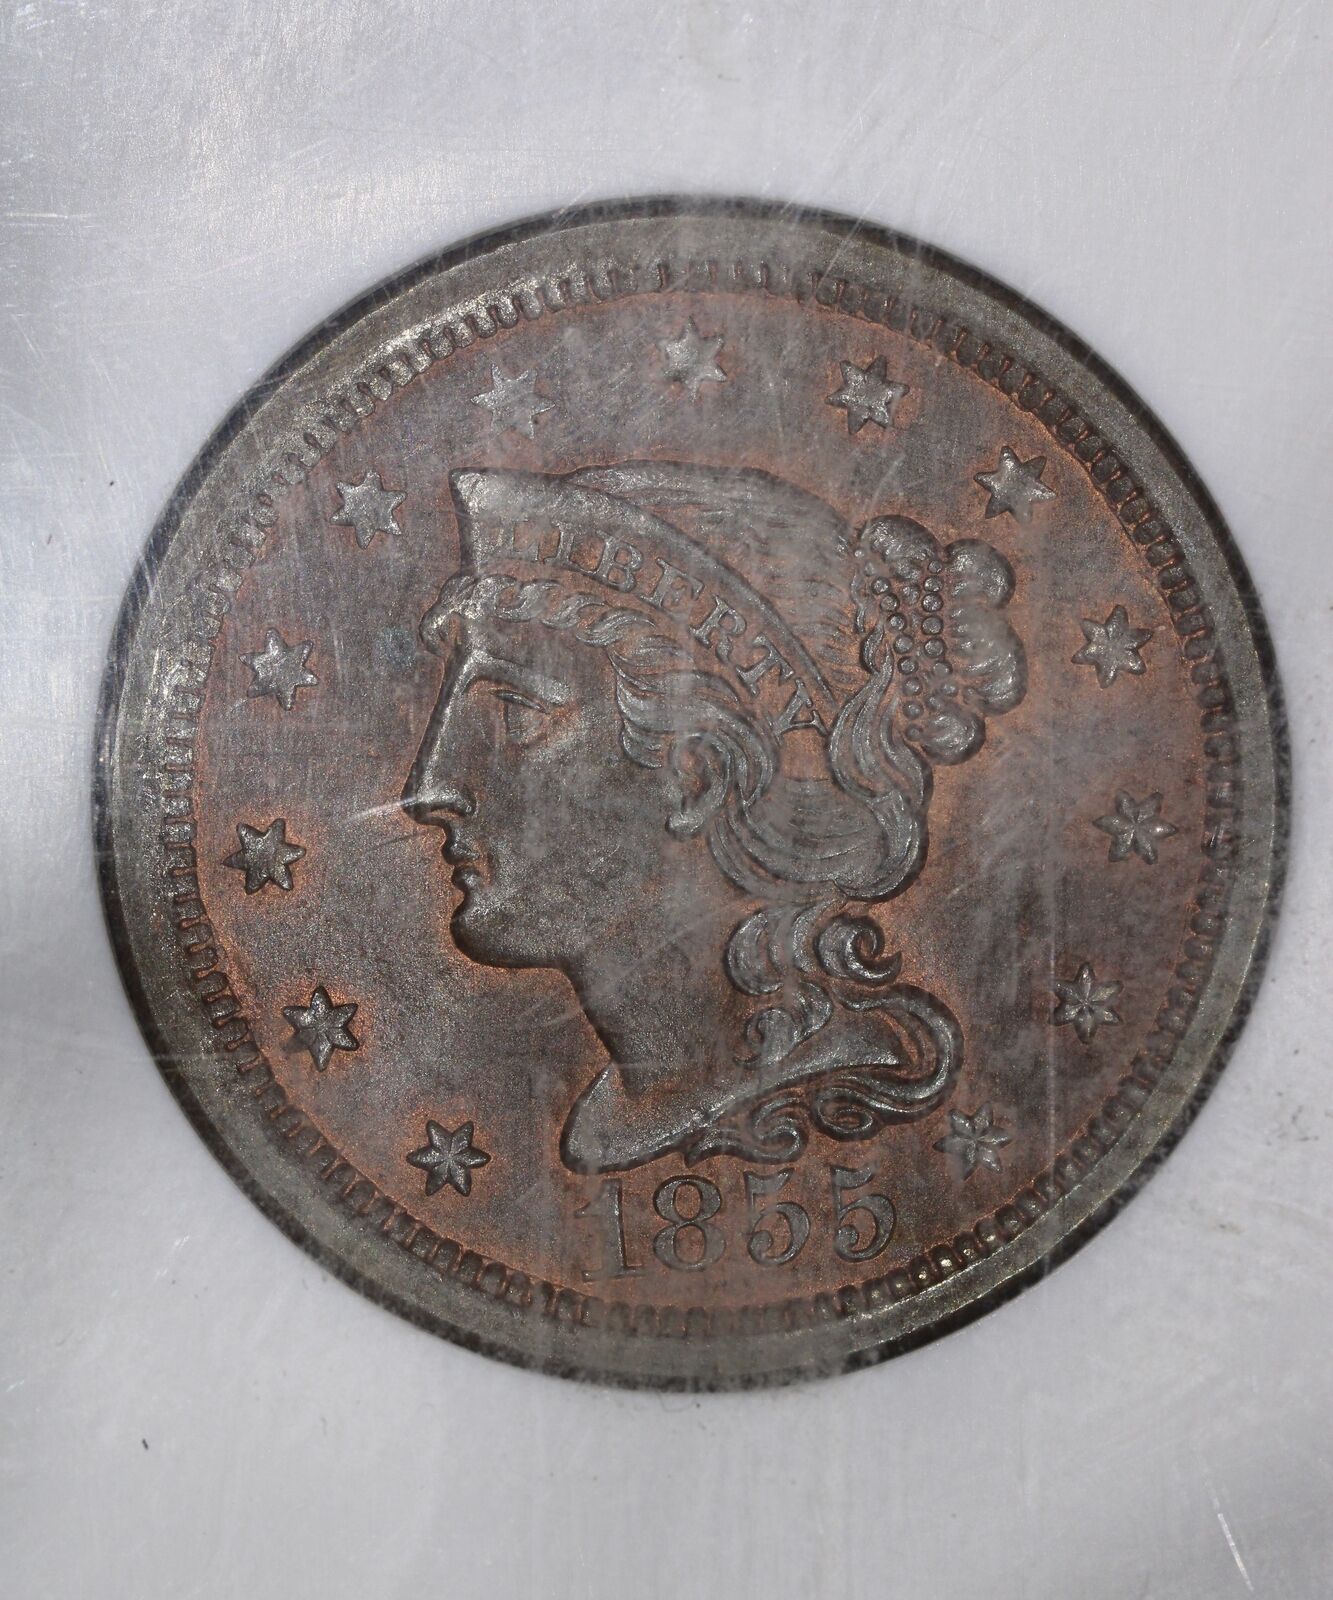 1855 Upright 5 (MS66 RB) N-2 Braided Hair Large Cent 1c NGC Graded Coin